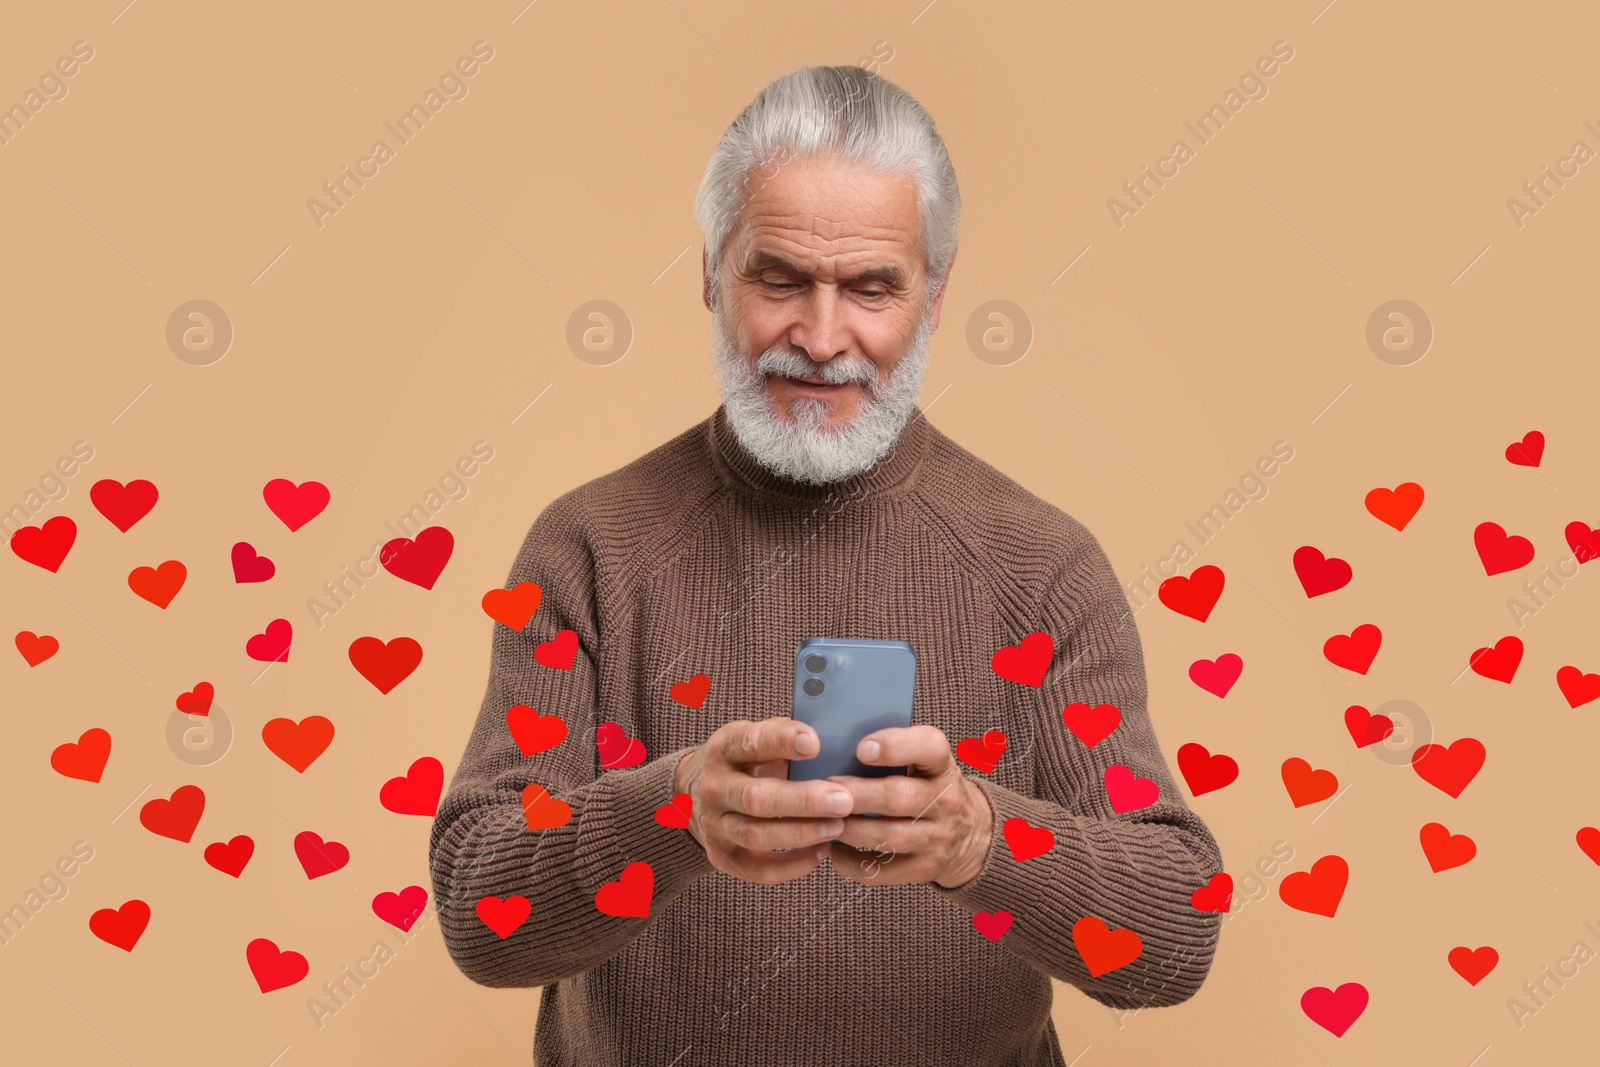 Image of Long distance love. Man chatting with sweetheart via smartphone on dark beige background. Hearts flying out of device and swirling around him